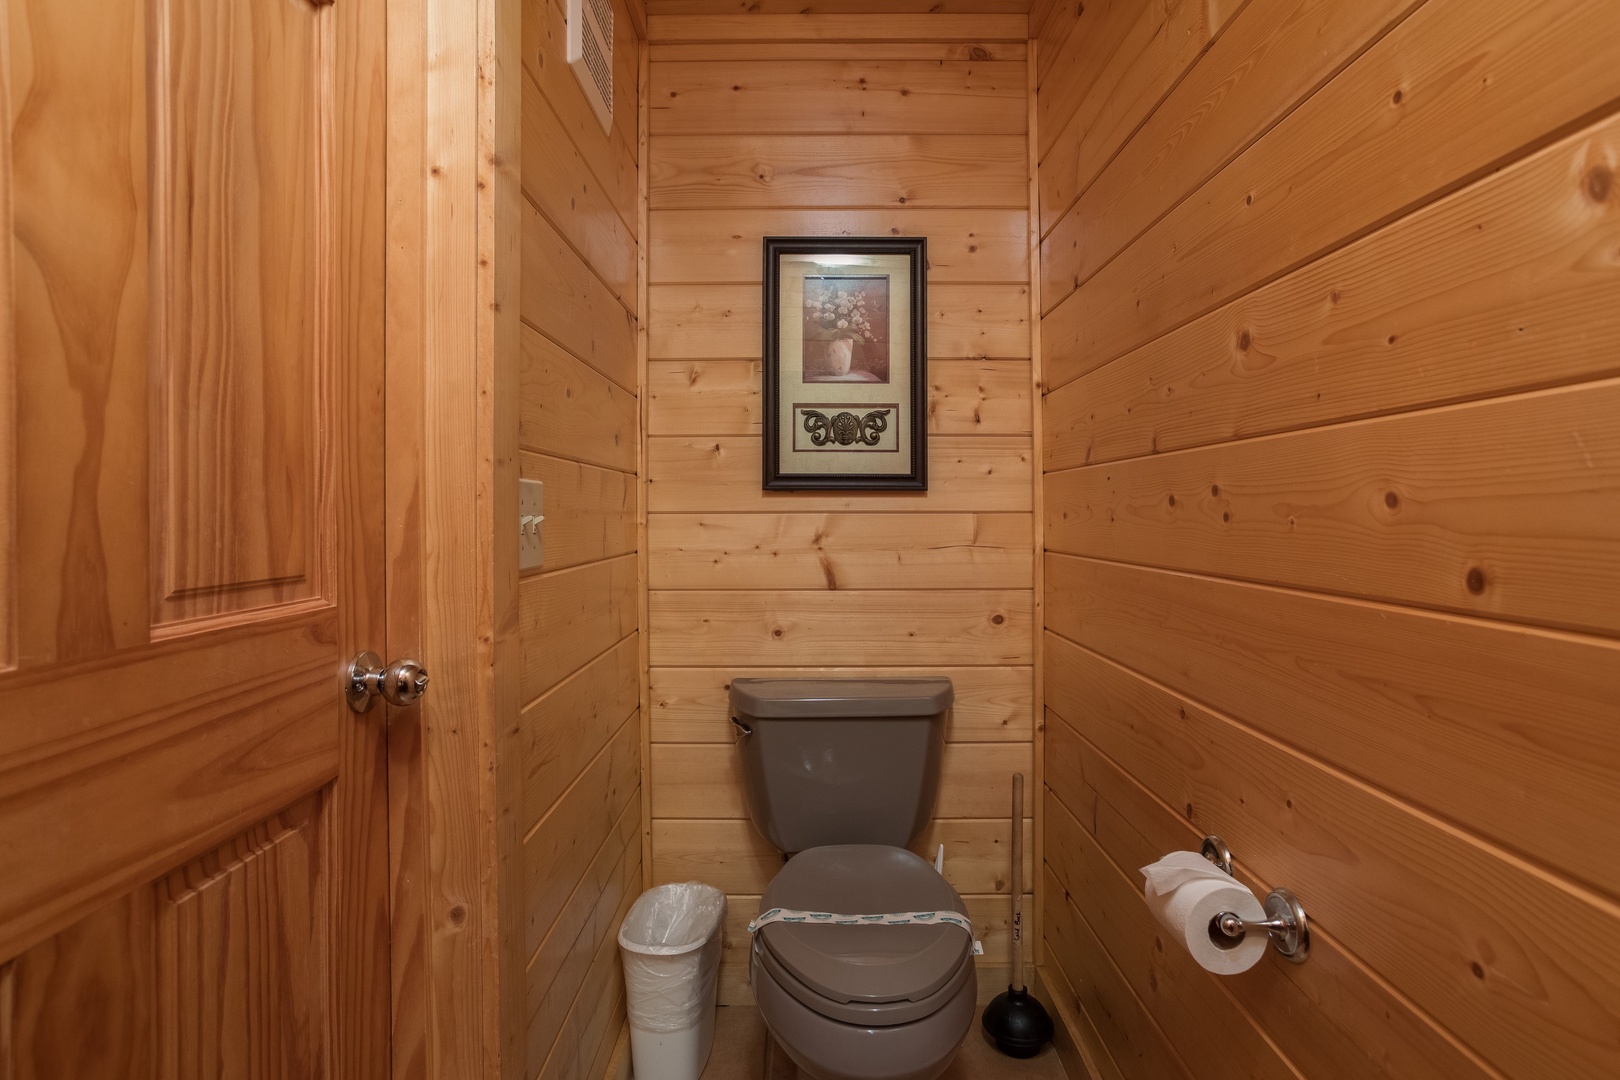 Bathroom at Laid Back, a 2 bedroom cabin rental located in Pigeon Forge